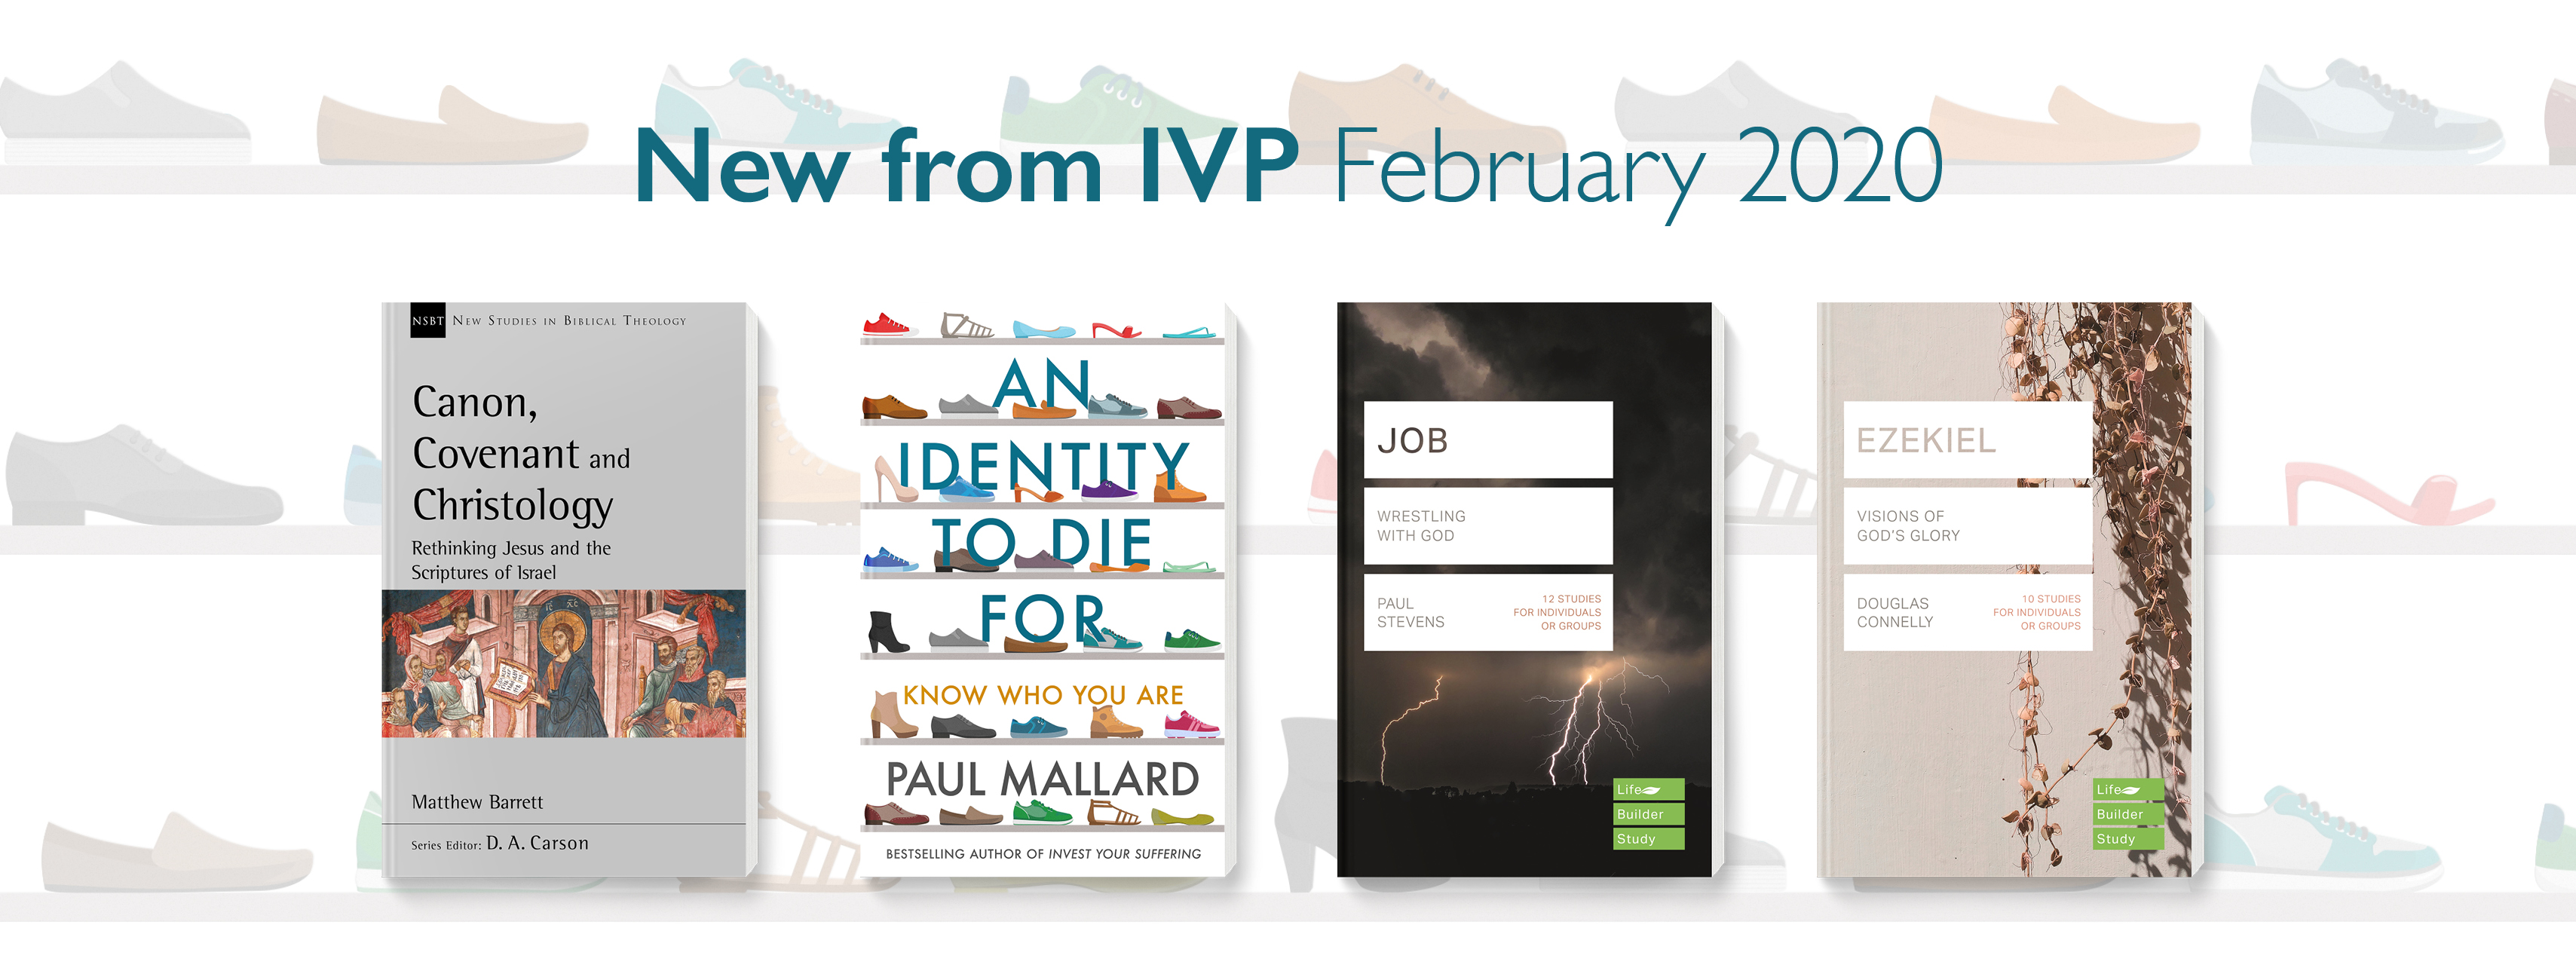 The IVP February 2020 Releases